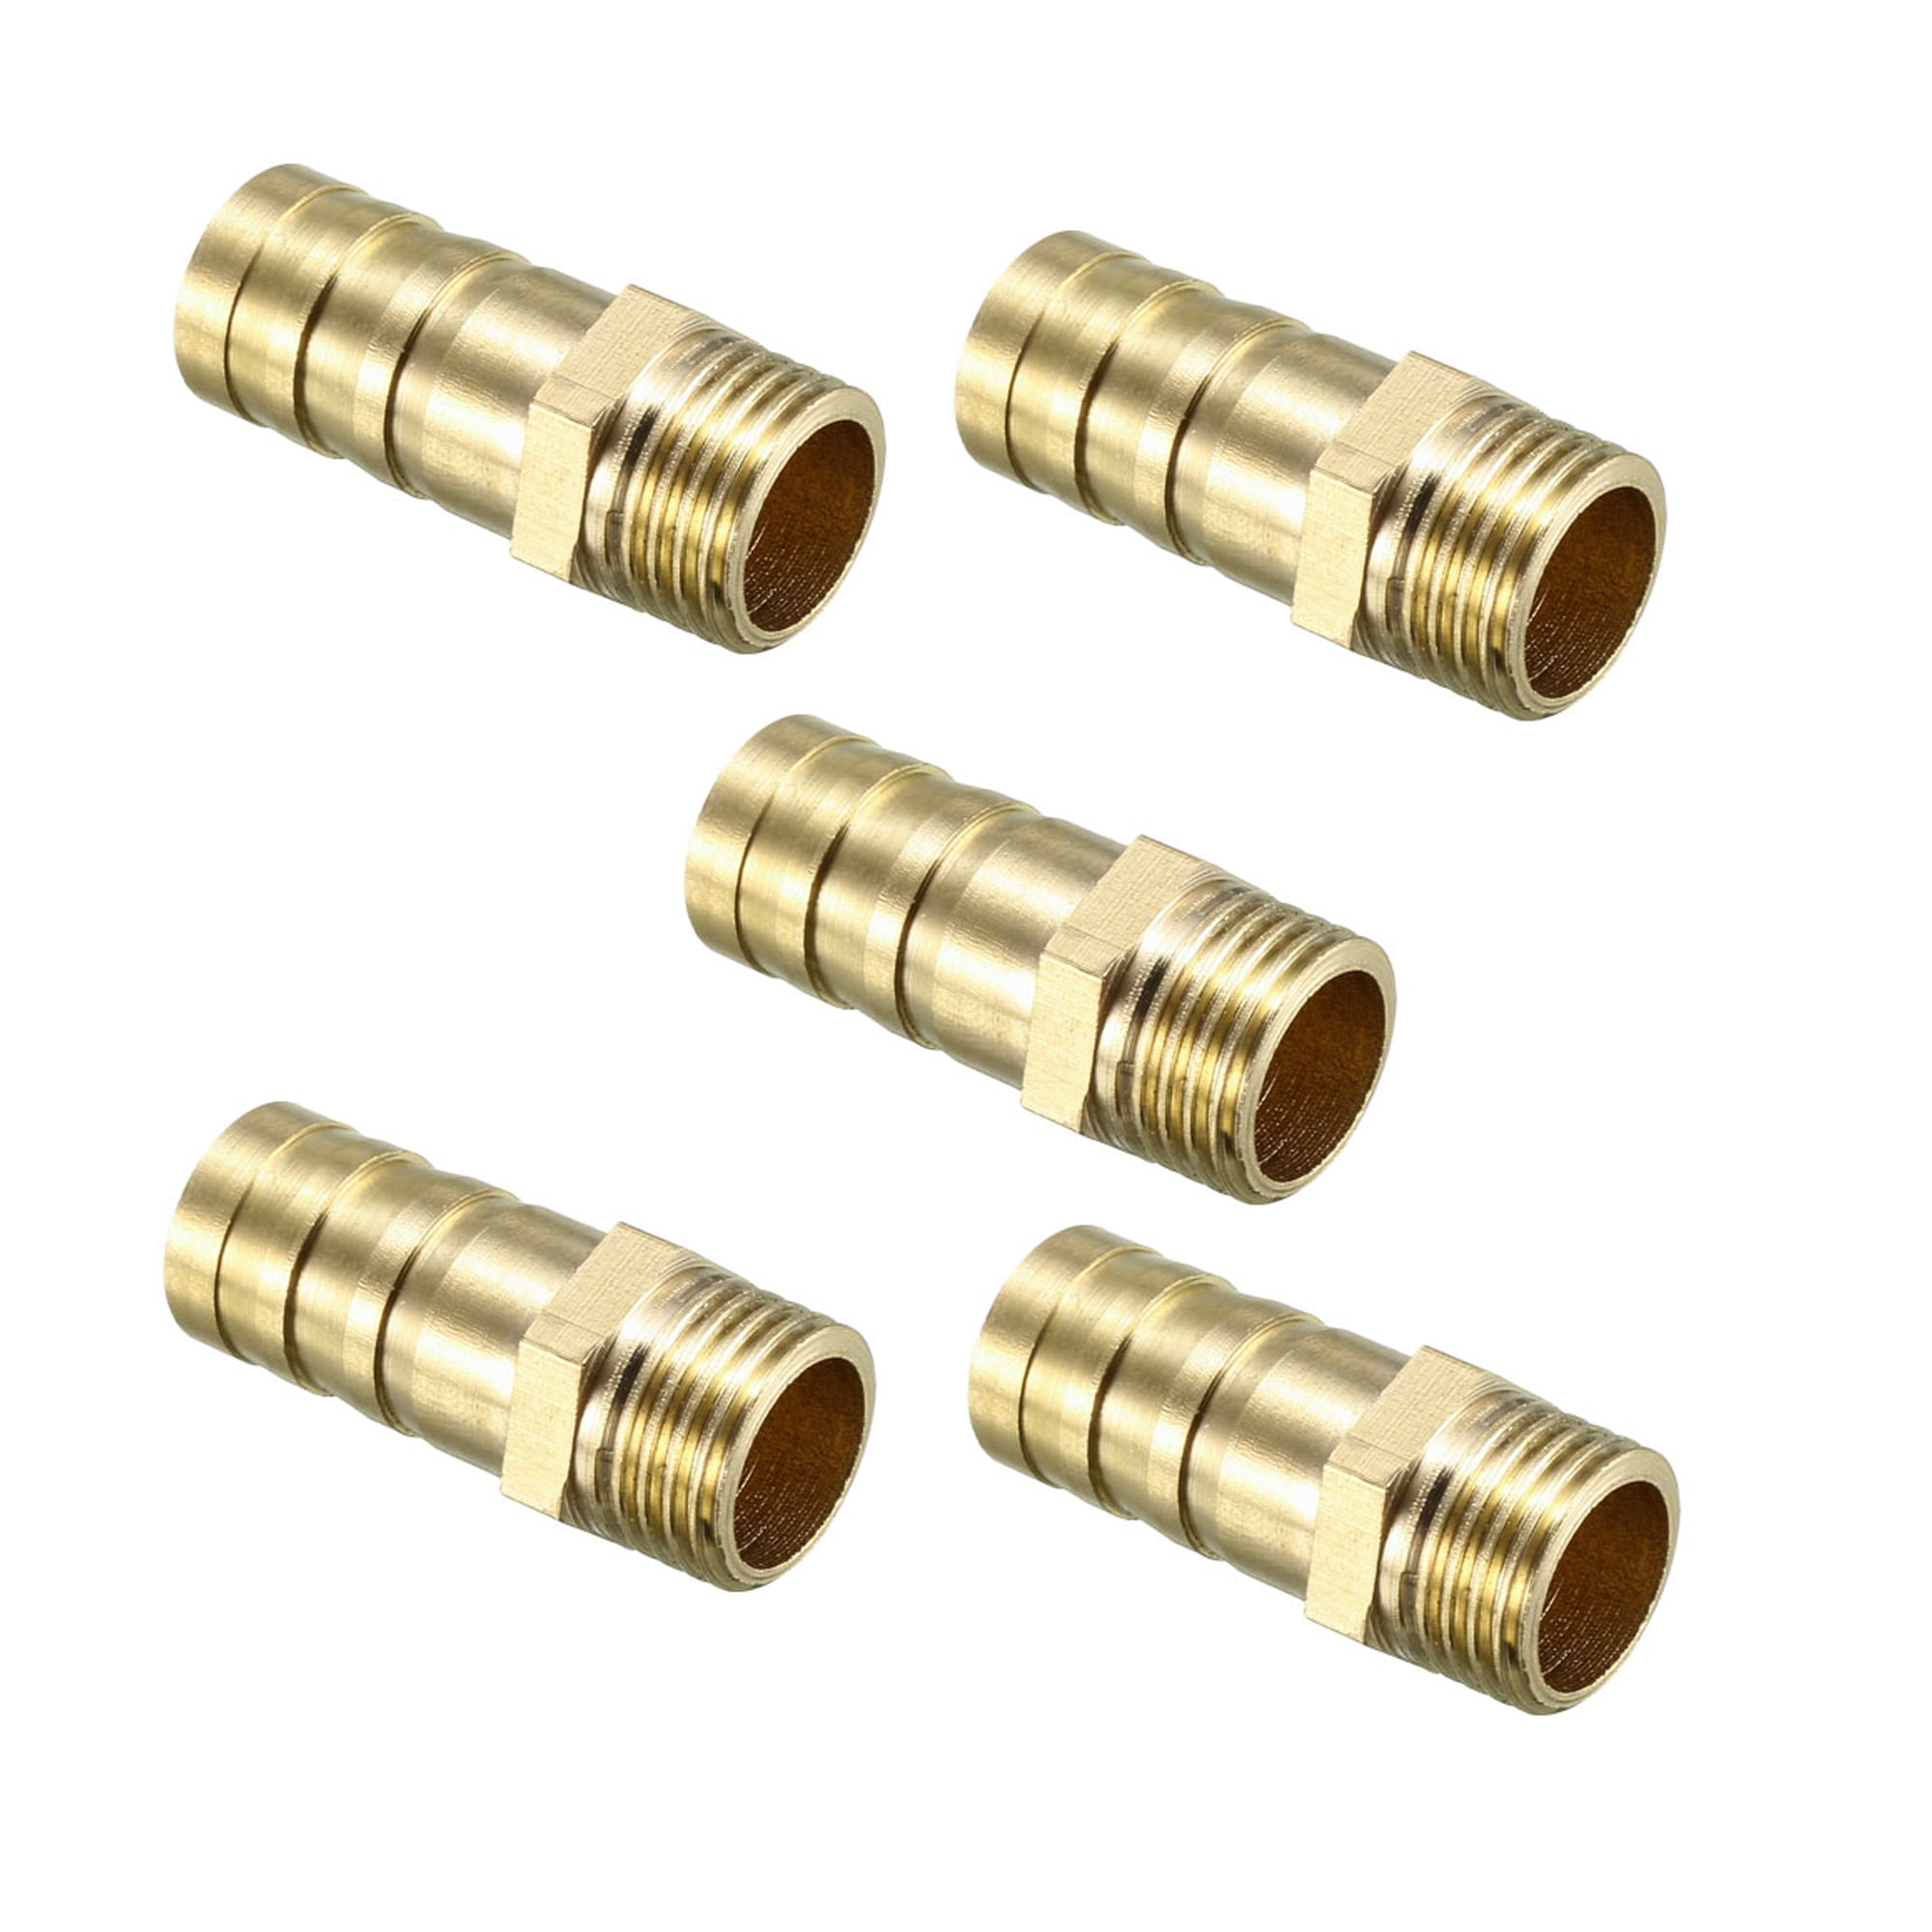 12mm 5pcs G3/8 Male Thread Barb Connector Brass Pipe Fitting Connector 